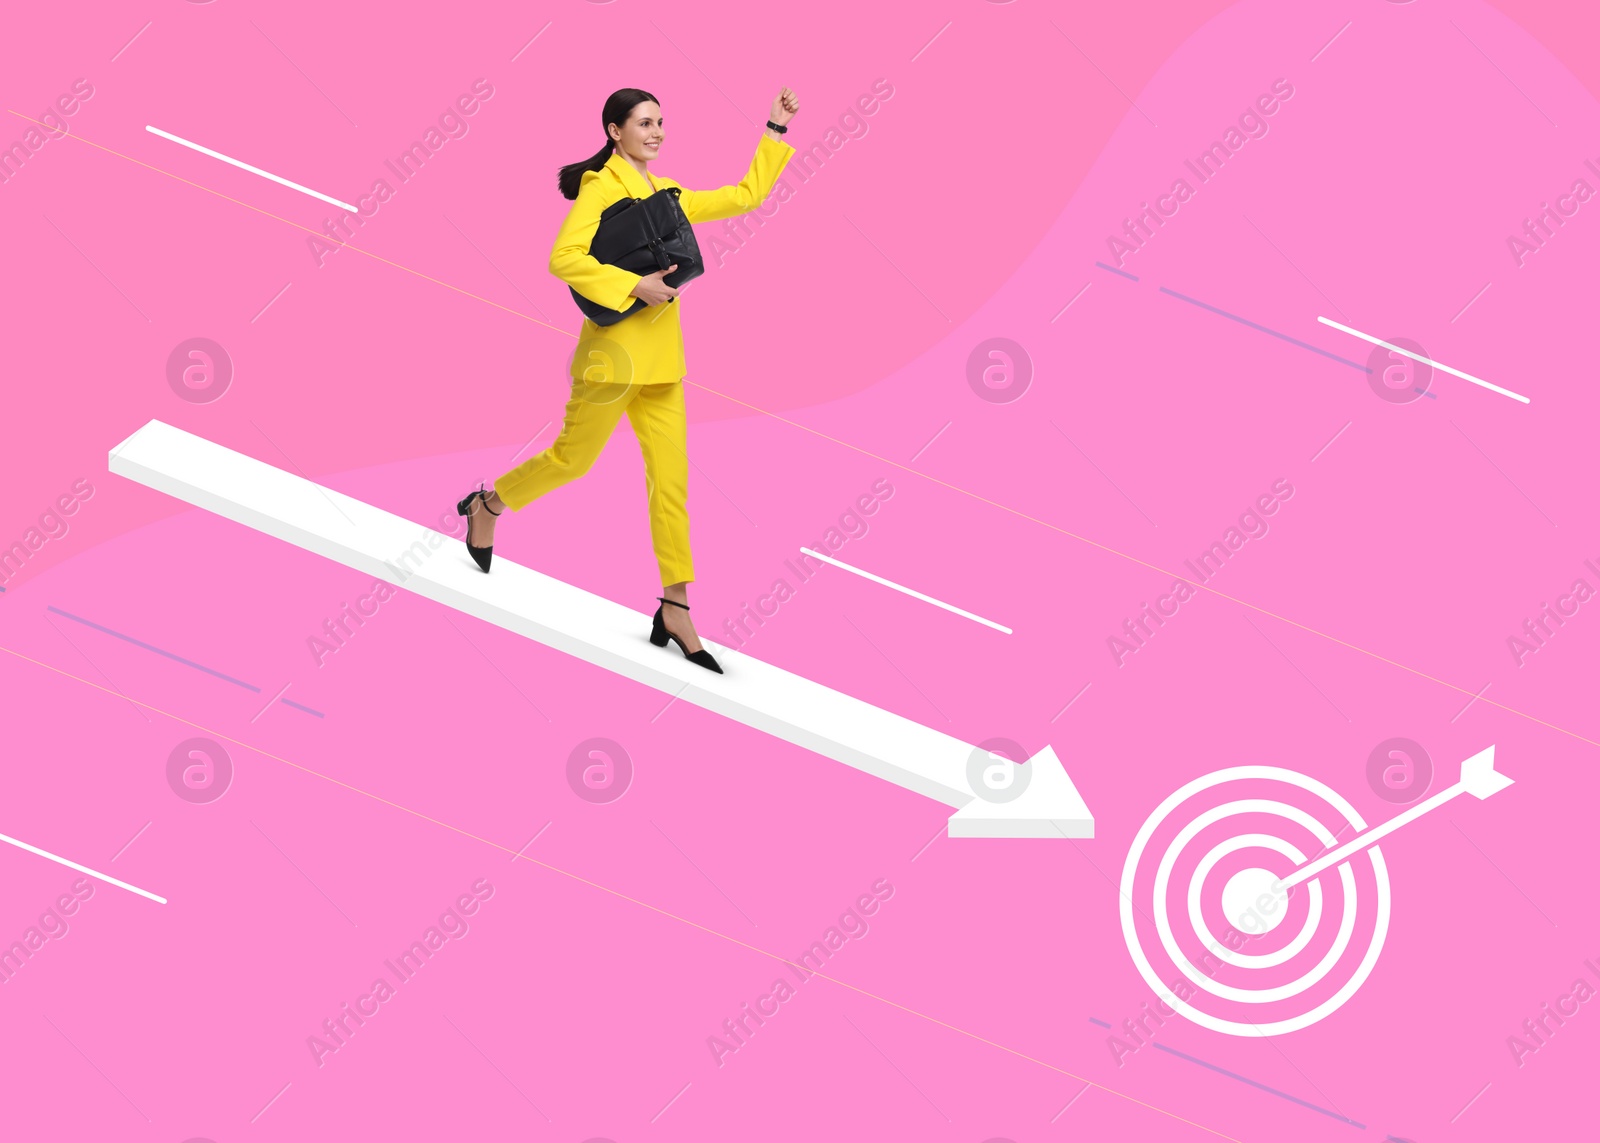 Image of Target achievement. Happy businesswoman running on arrow, leading her to dartboard on pink background